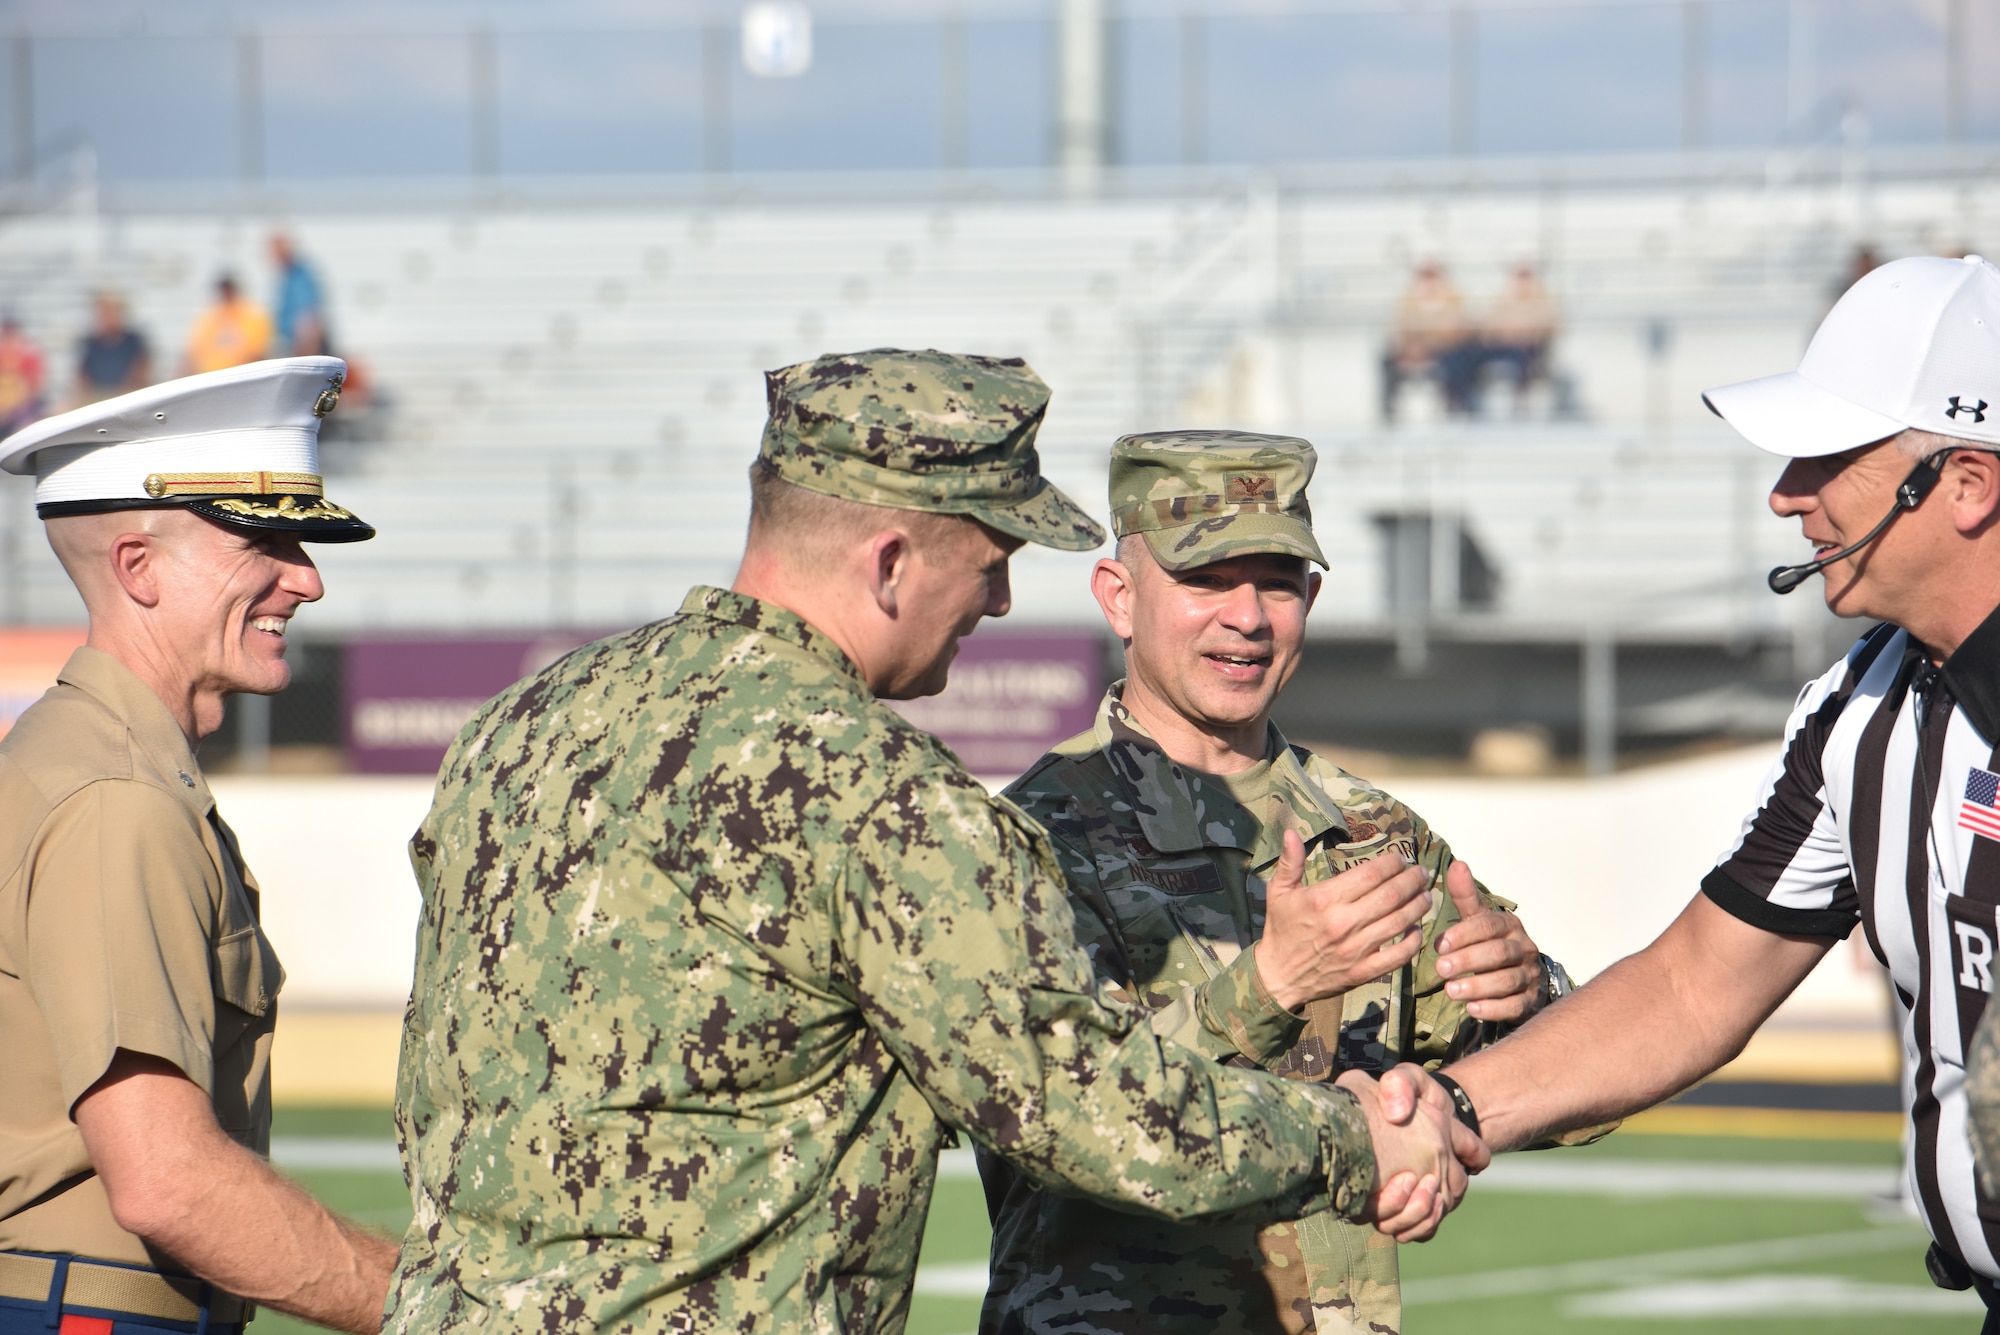 Goodfellow leadership shakes hands with a referee before the start of the Angelo State University vs Simon Fraser University football game which ASU used to host their annual military appreciation night at 1st Community Credit Union Field, San Angelo, Texas, Sept. 14, 2019. U.S. Air Force Col. Andres Nazario, 17th Training Wing commander, presented the game ball to the referee before the start of the game. (U.S. Air Force photo by Senior Airman Seraiah Wolf/Released)